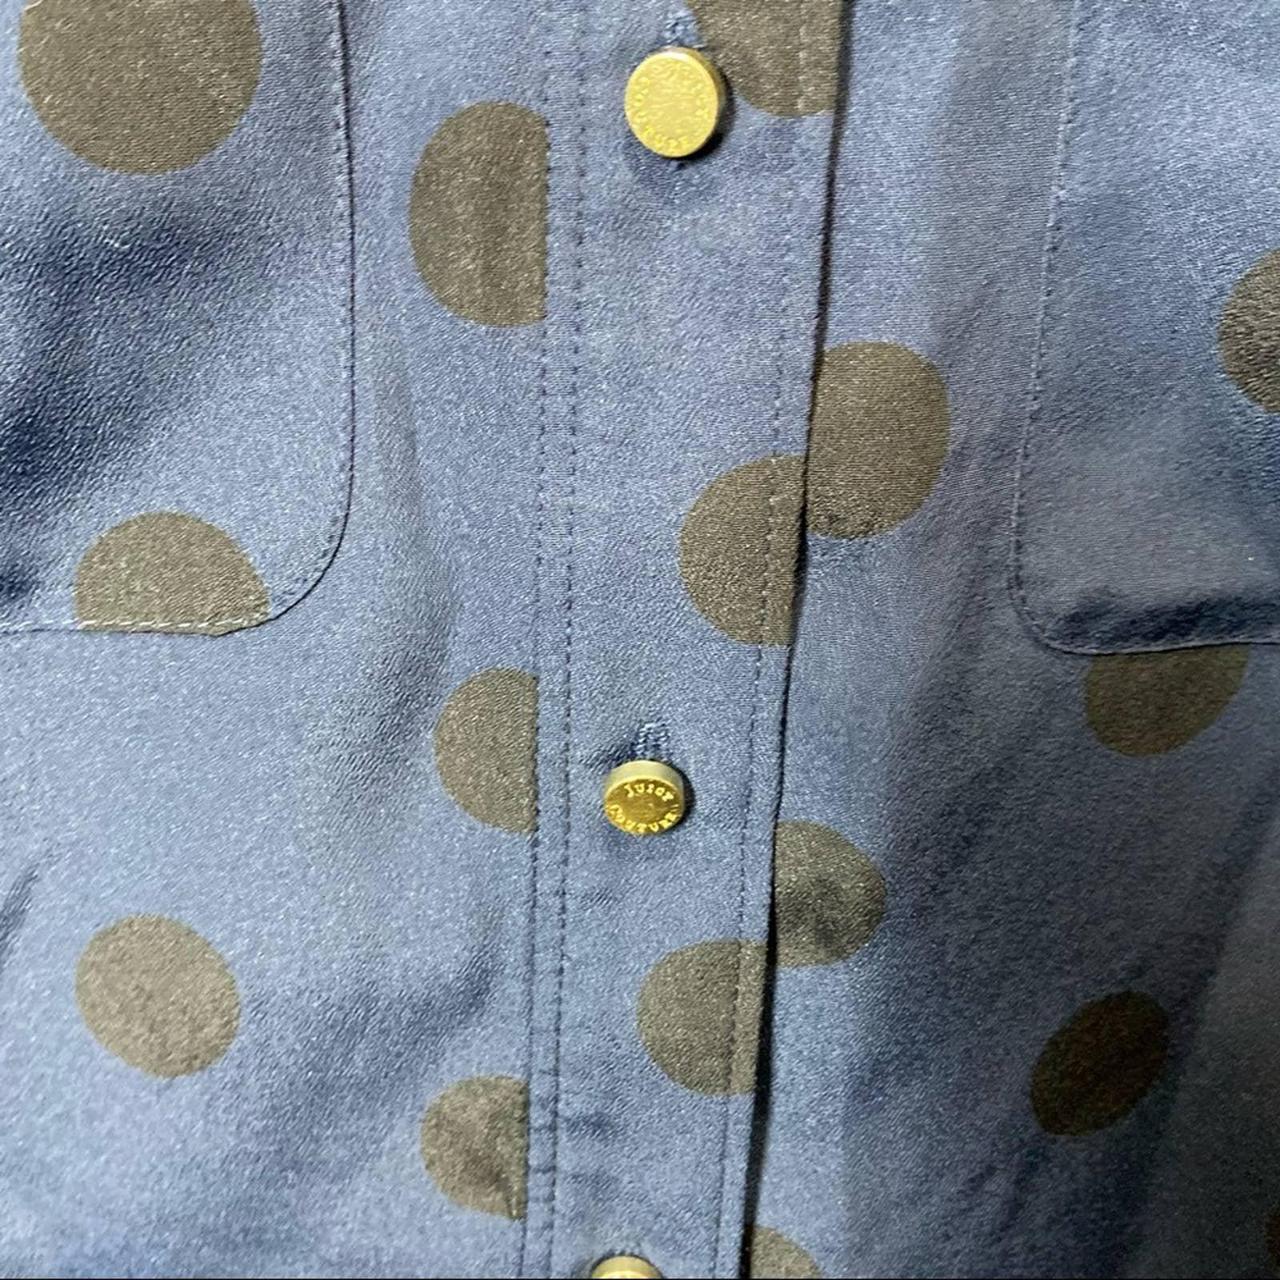 Product Image 2 - Juicy couture polka dot button